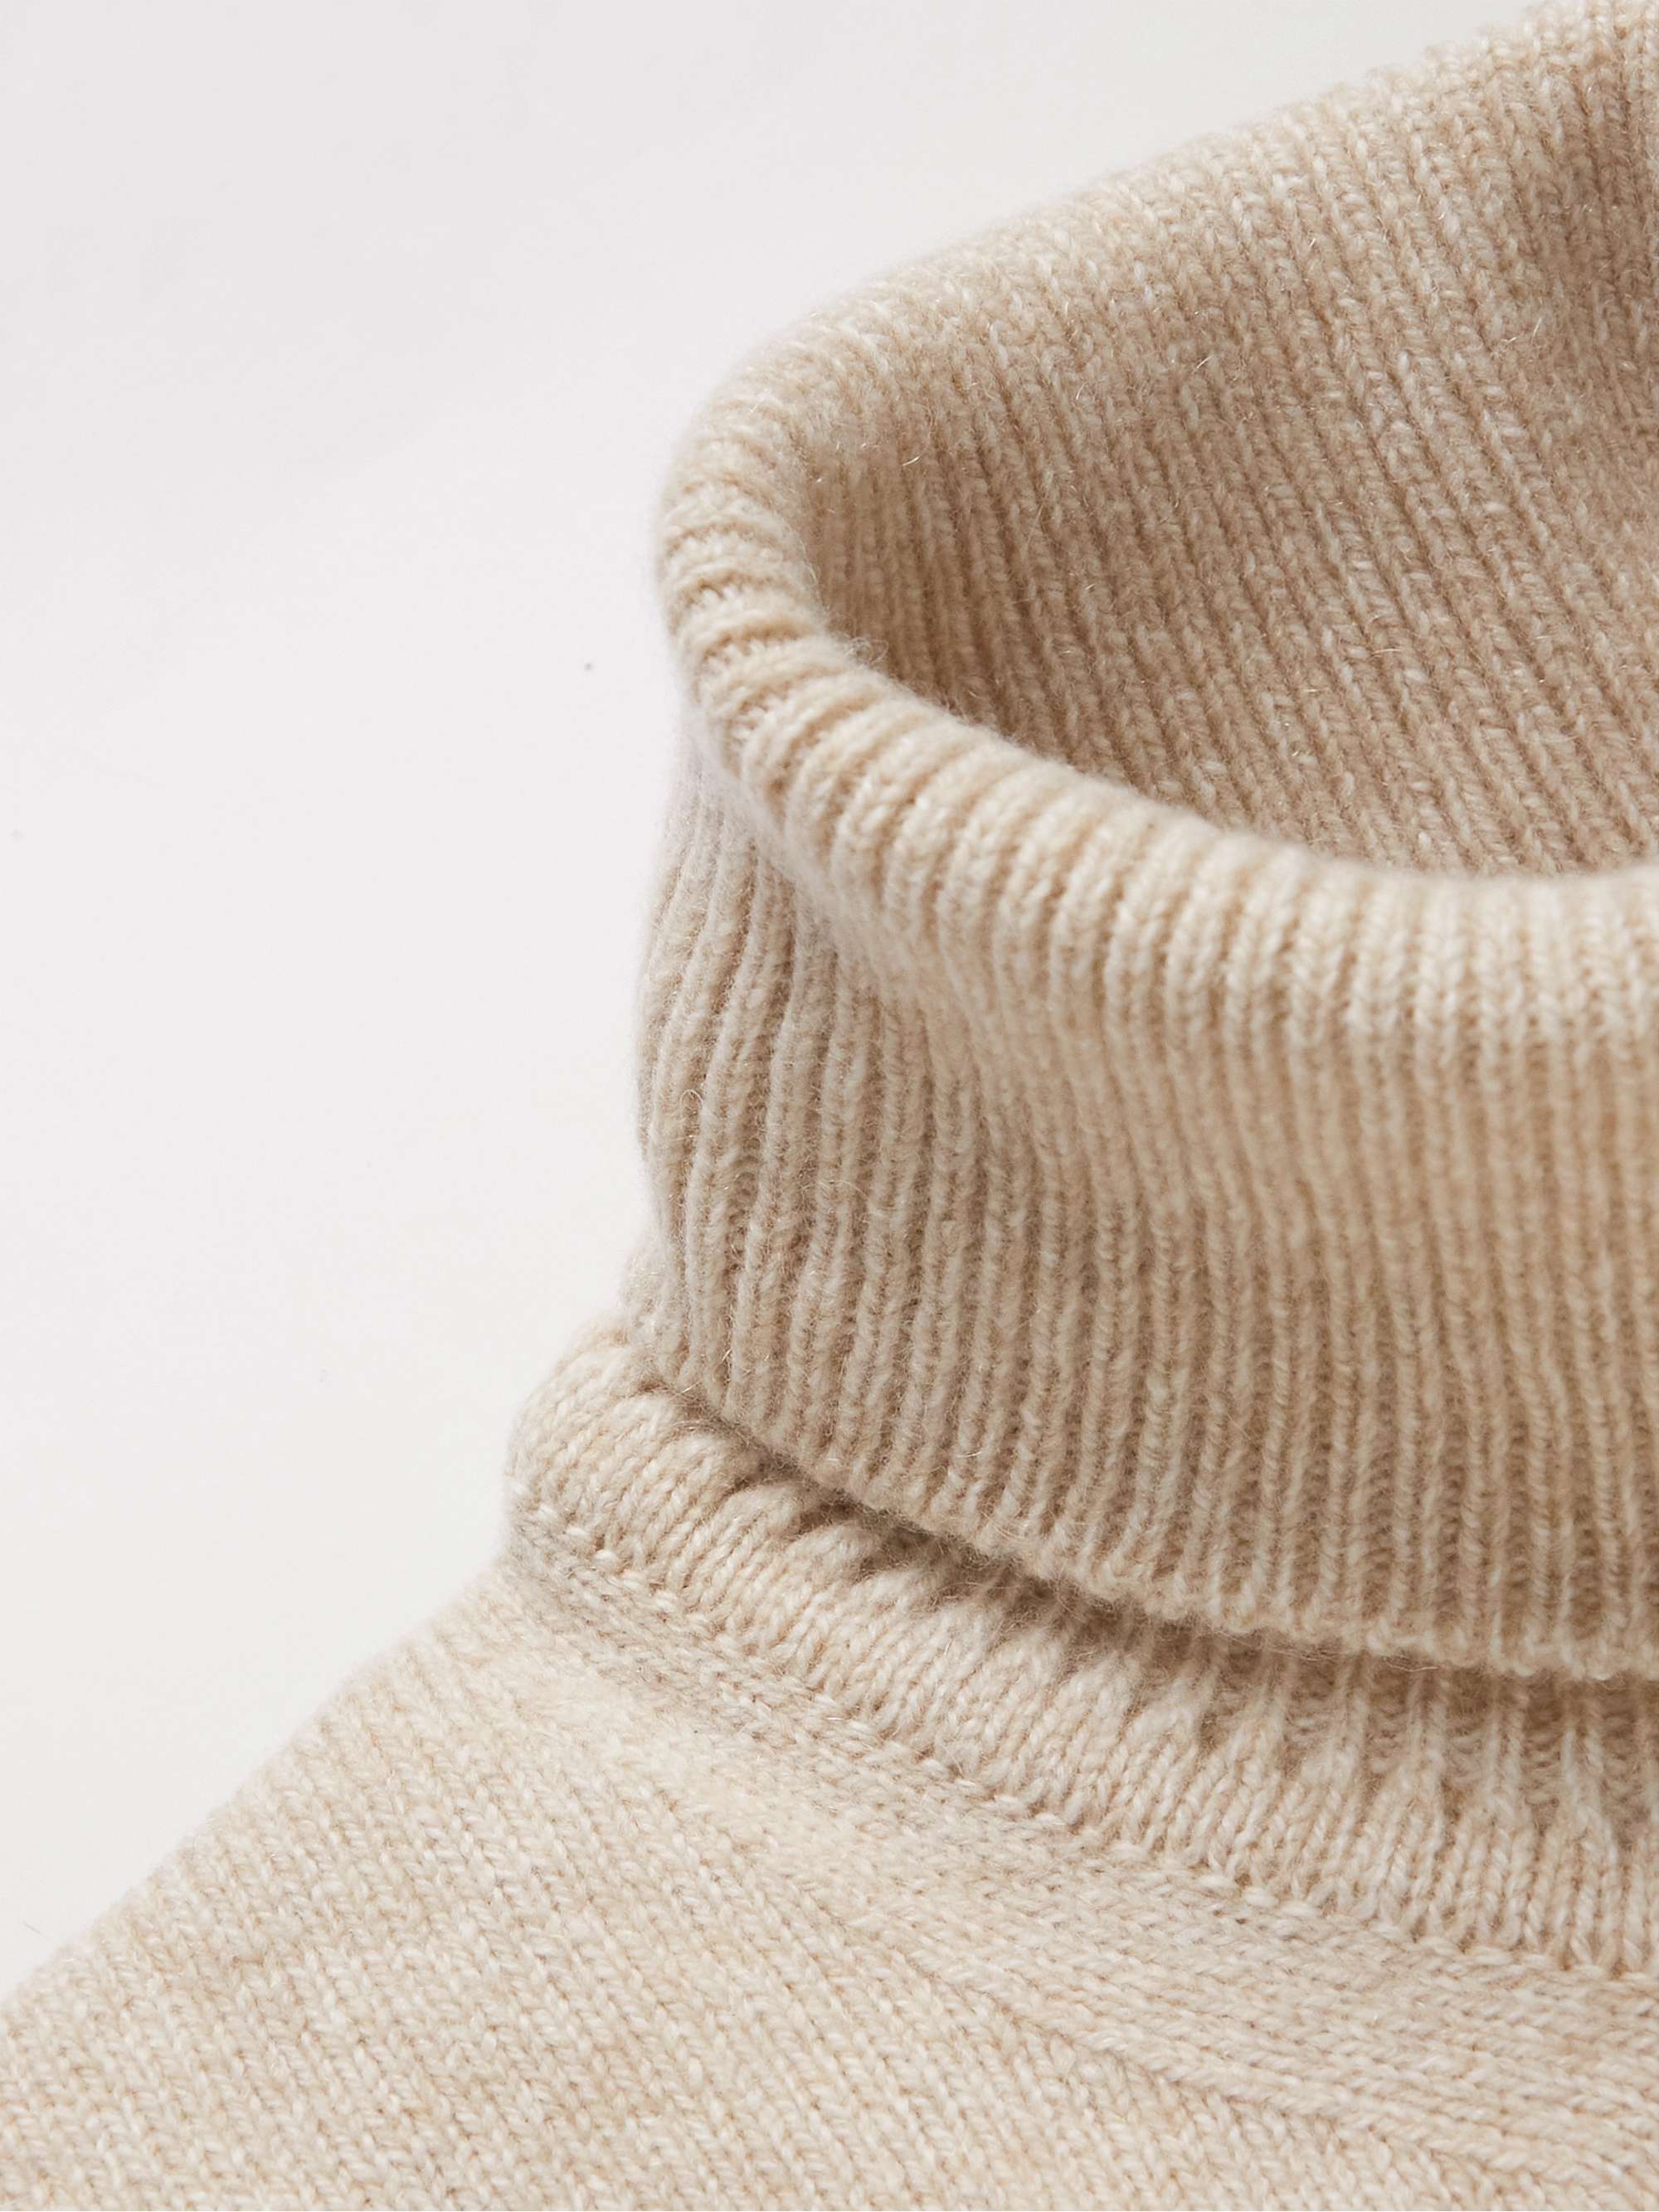 JOHN SMEDLEY Kolton Recycled Cashmere and Merino Wool-Blend Rollneck Sweater